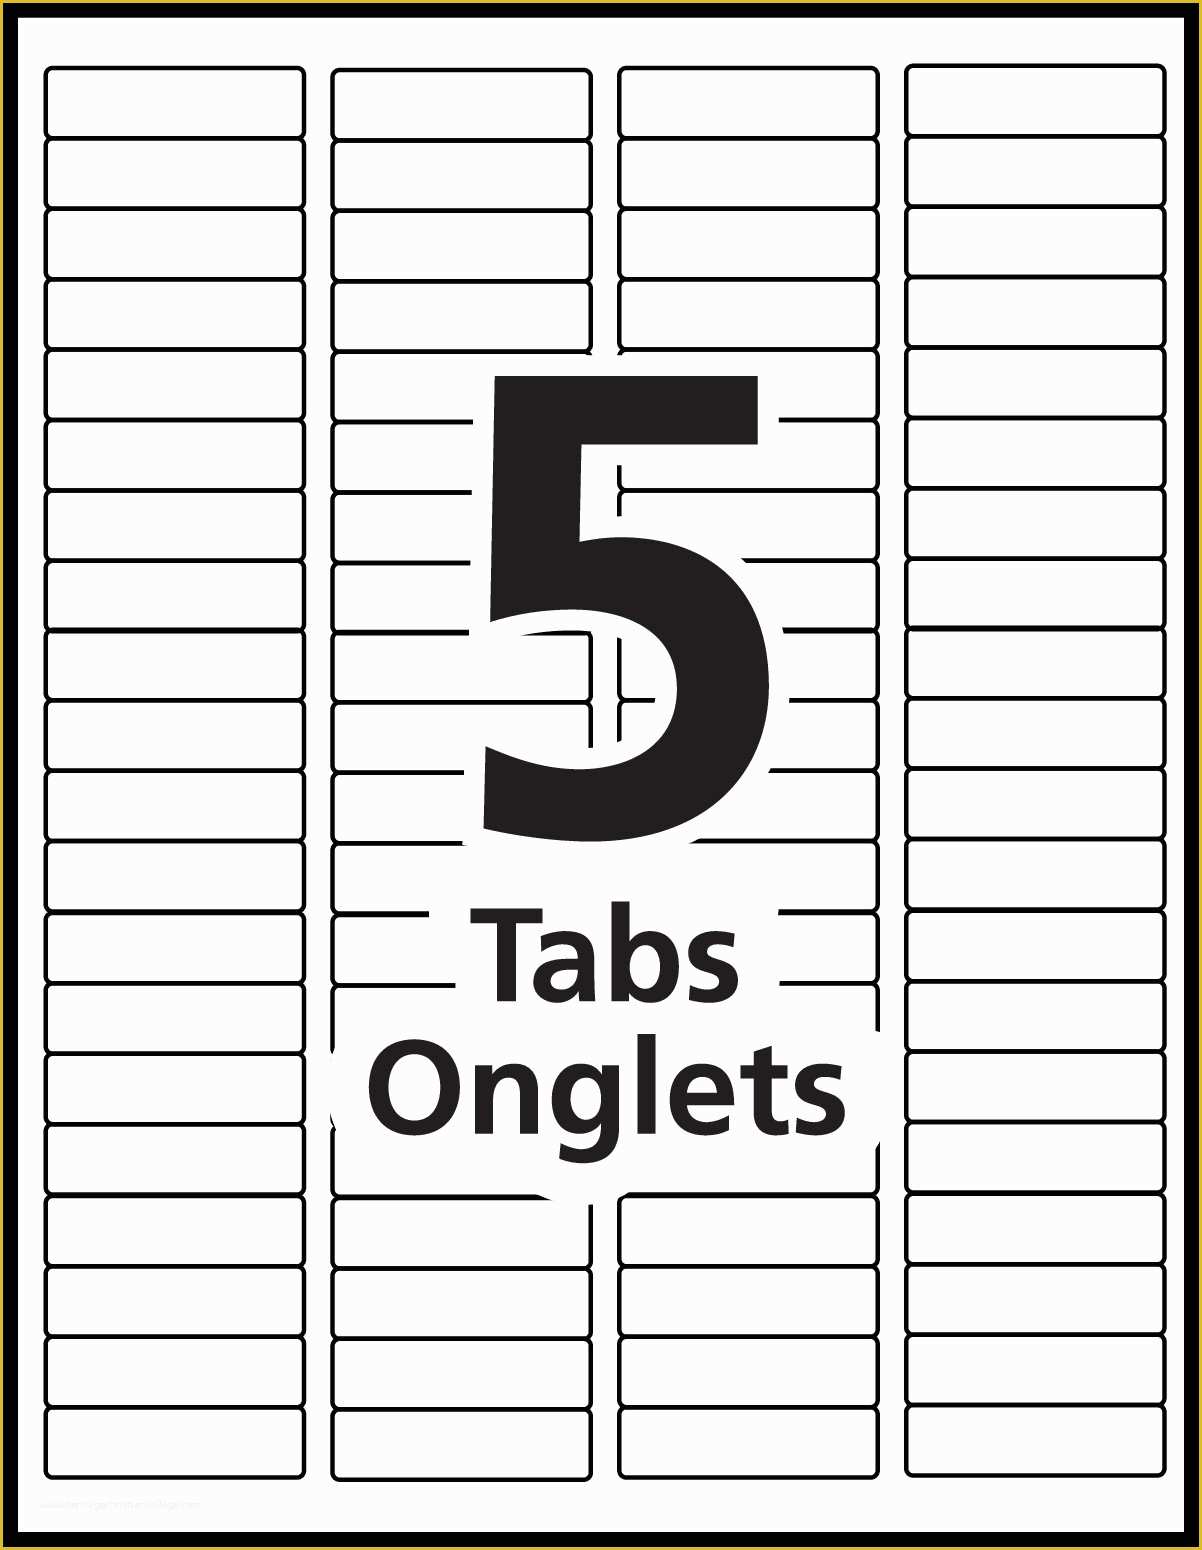 File Folder Tabs Template Free Of Index Maker Dividers Templates Heritagechristiancollege